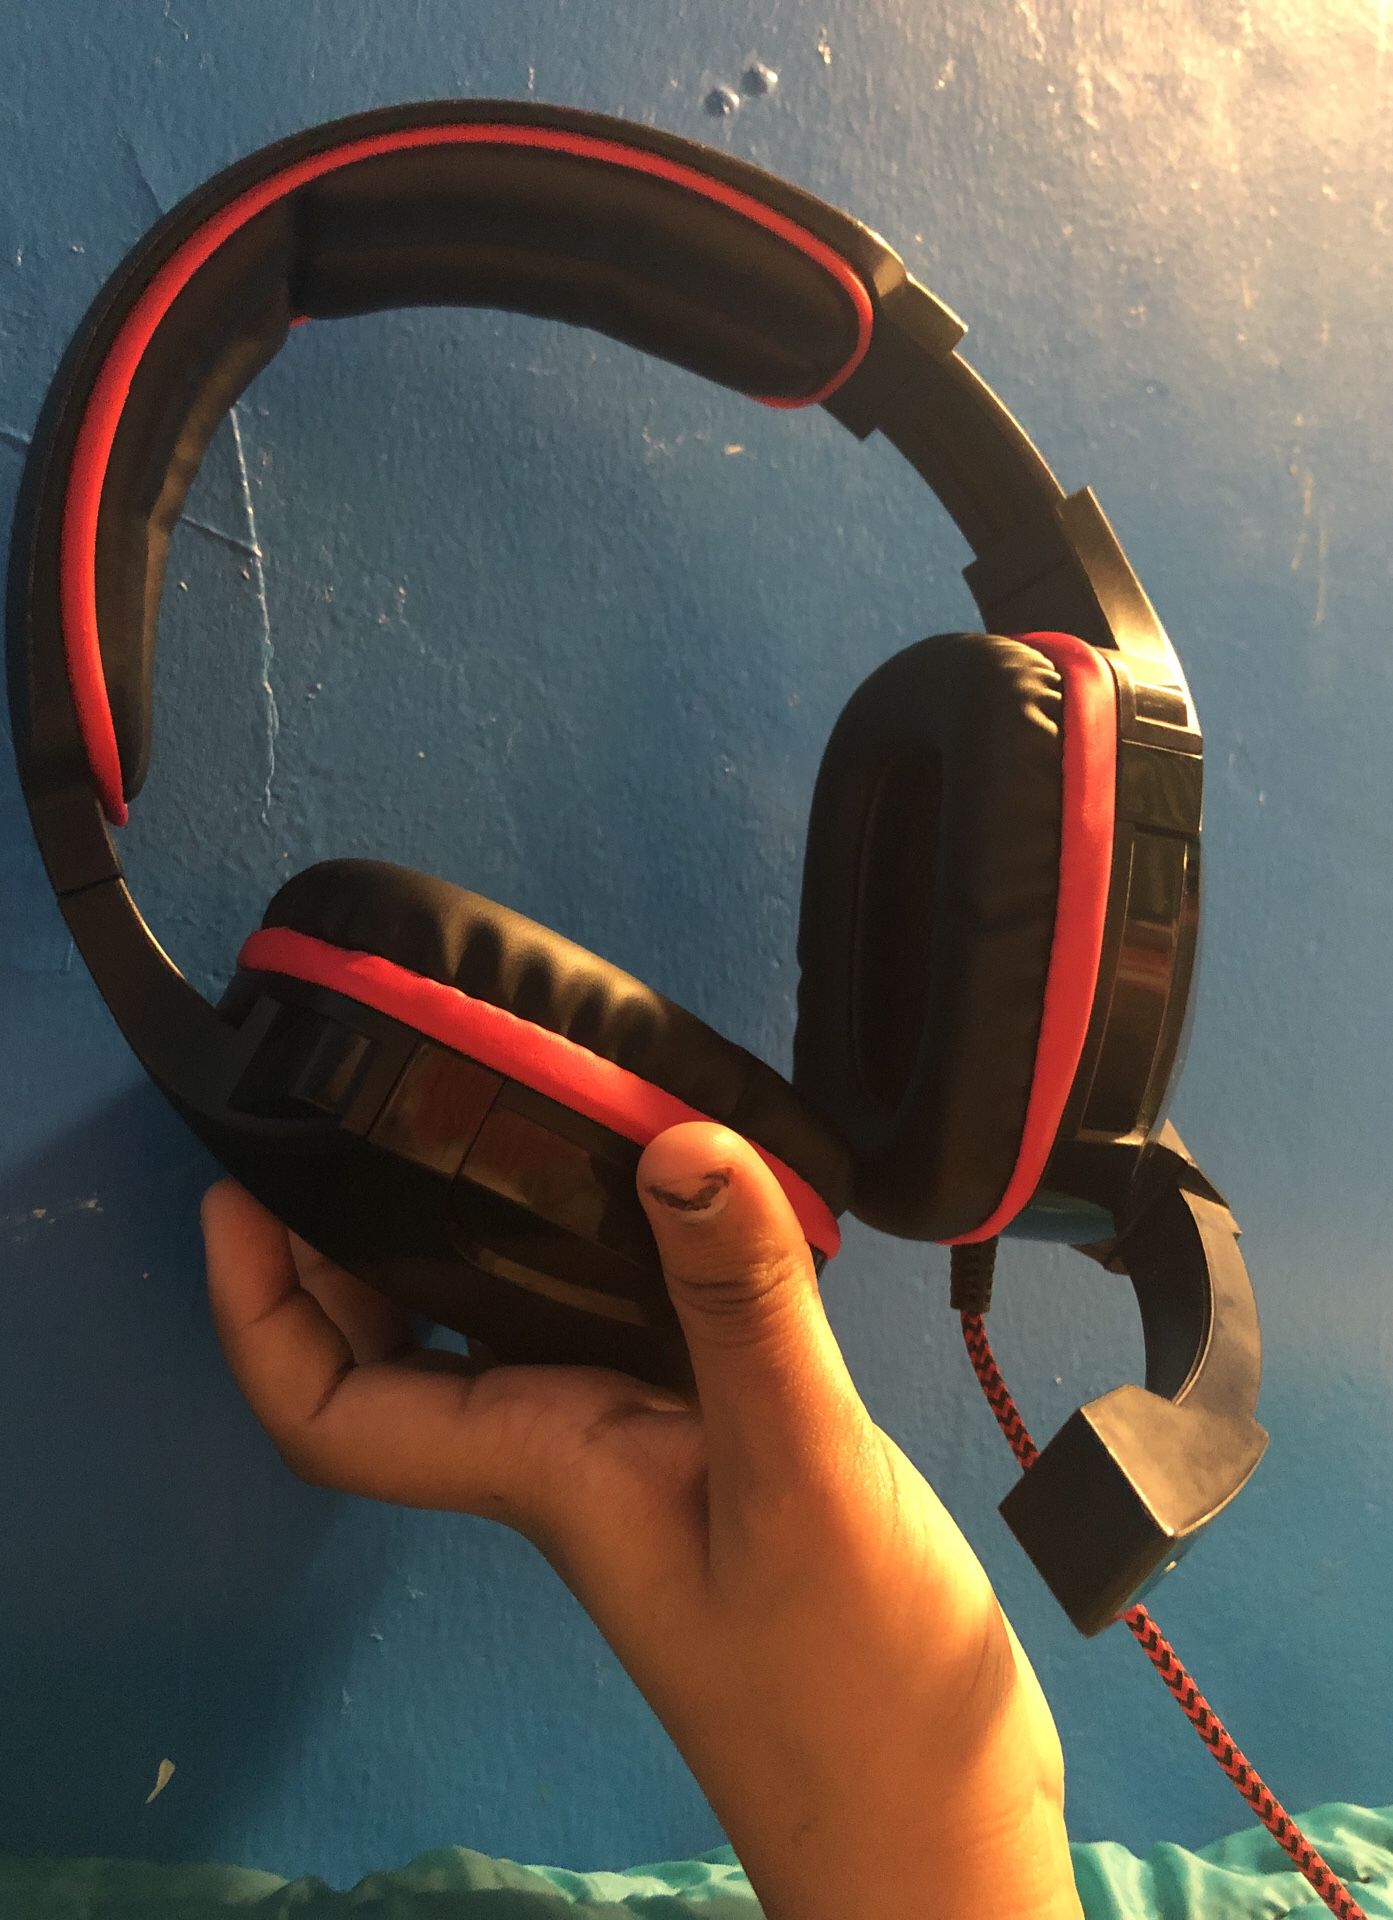 Headphones for any game